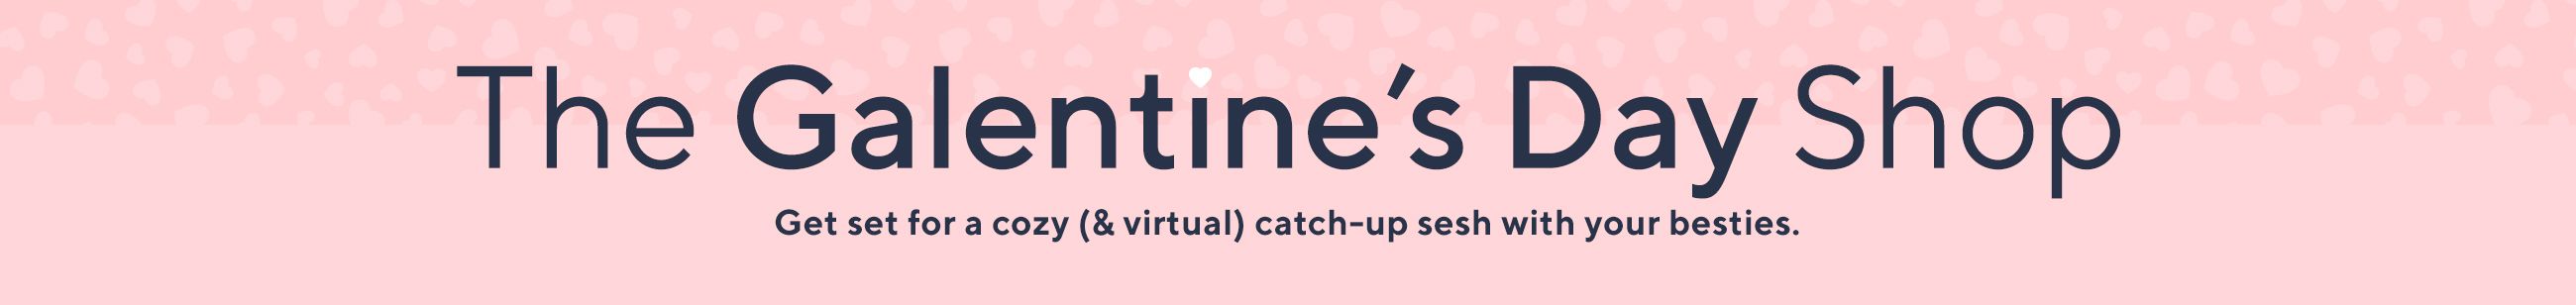 The Galentine's Day Shop. Get set for a cozy (& virtual) catch-up sesh with your besties.